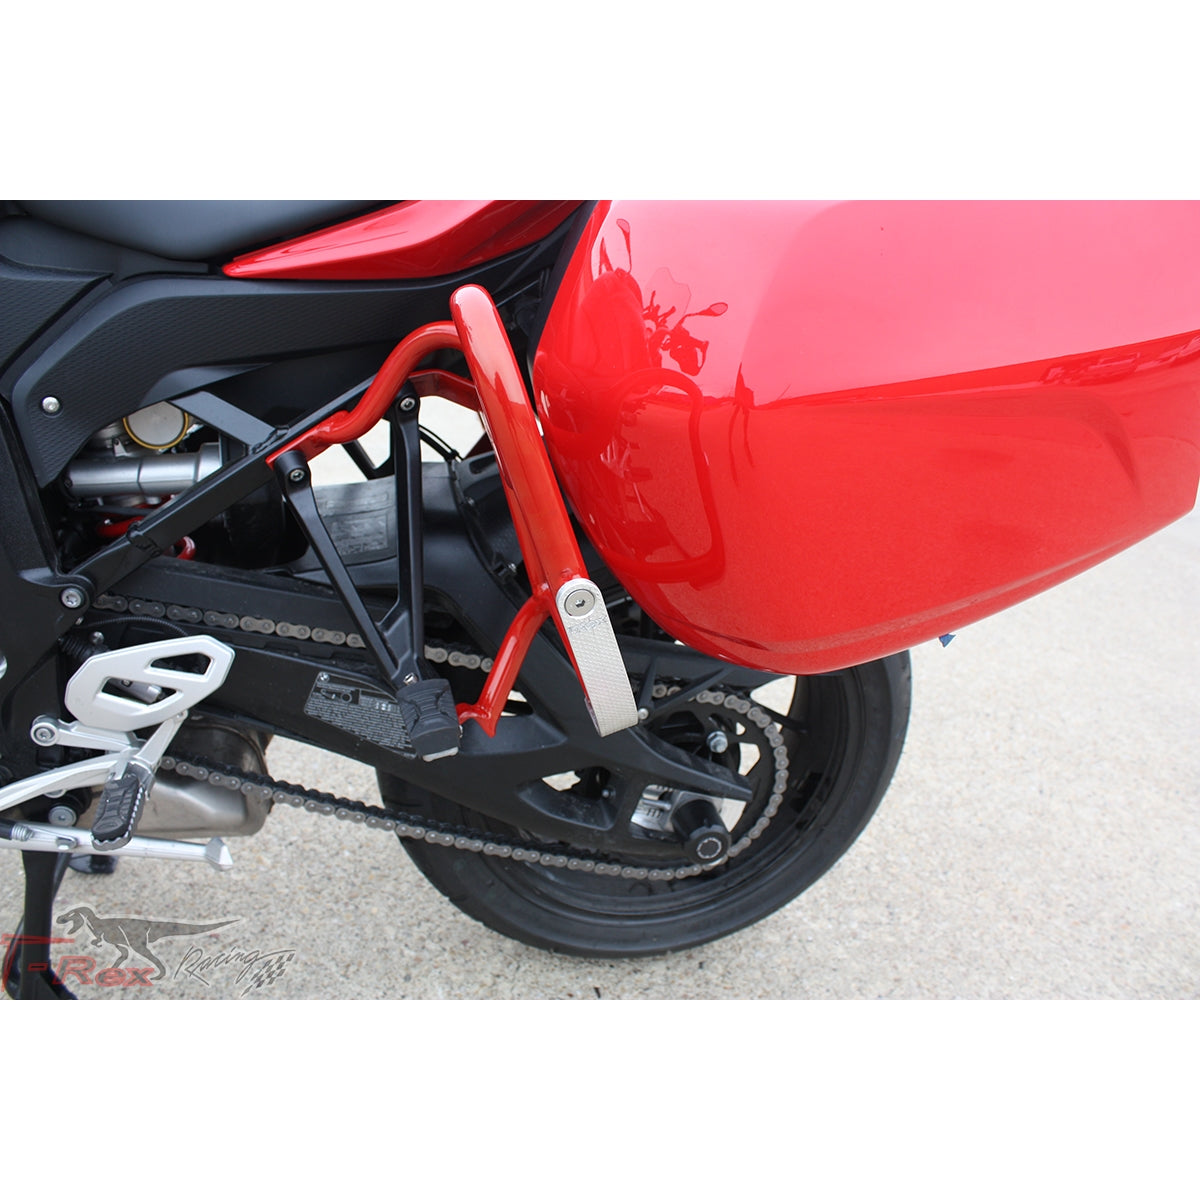 T-rex 116 - 2017 bmw s1000xr luggage guards